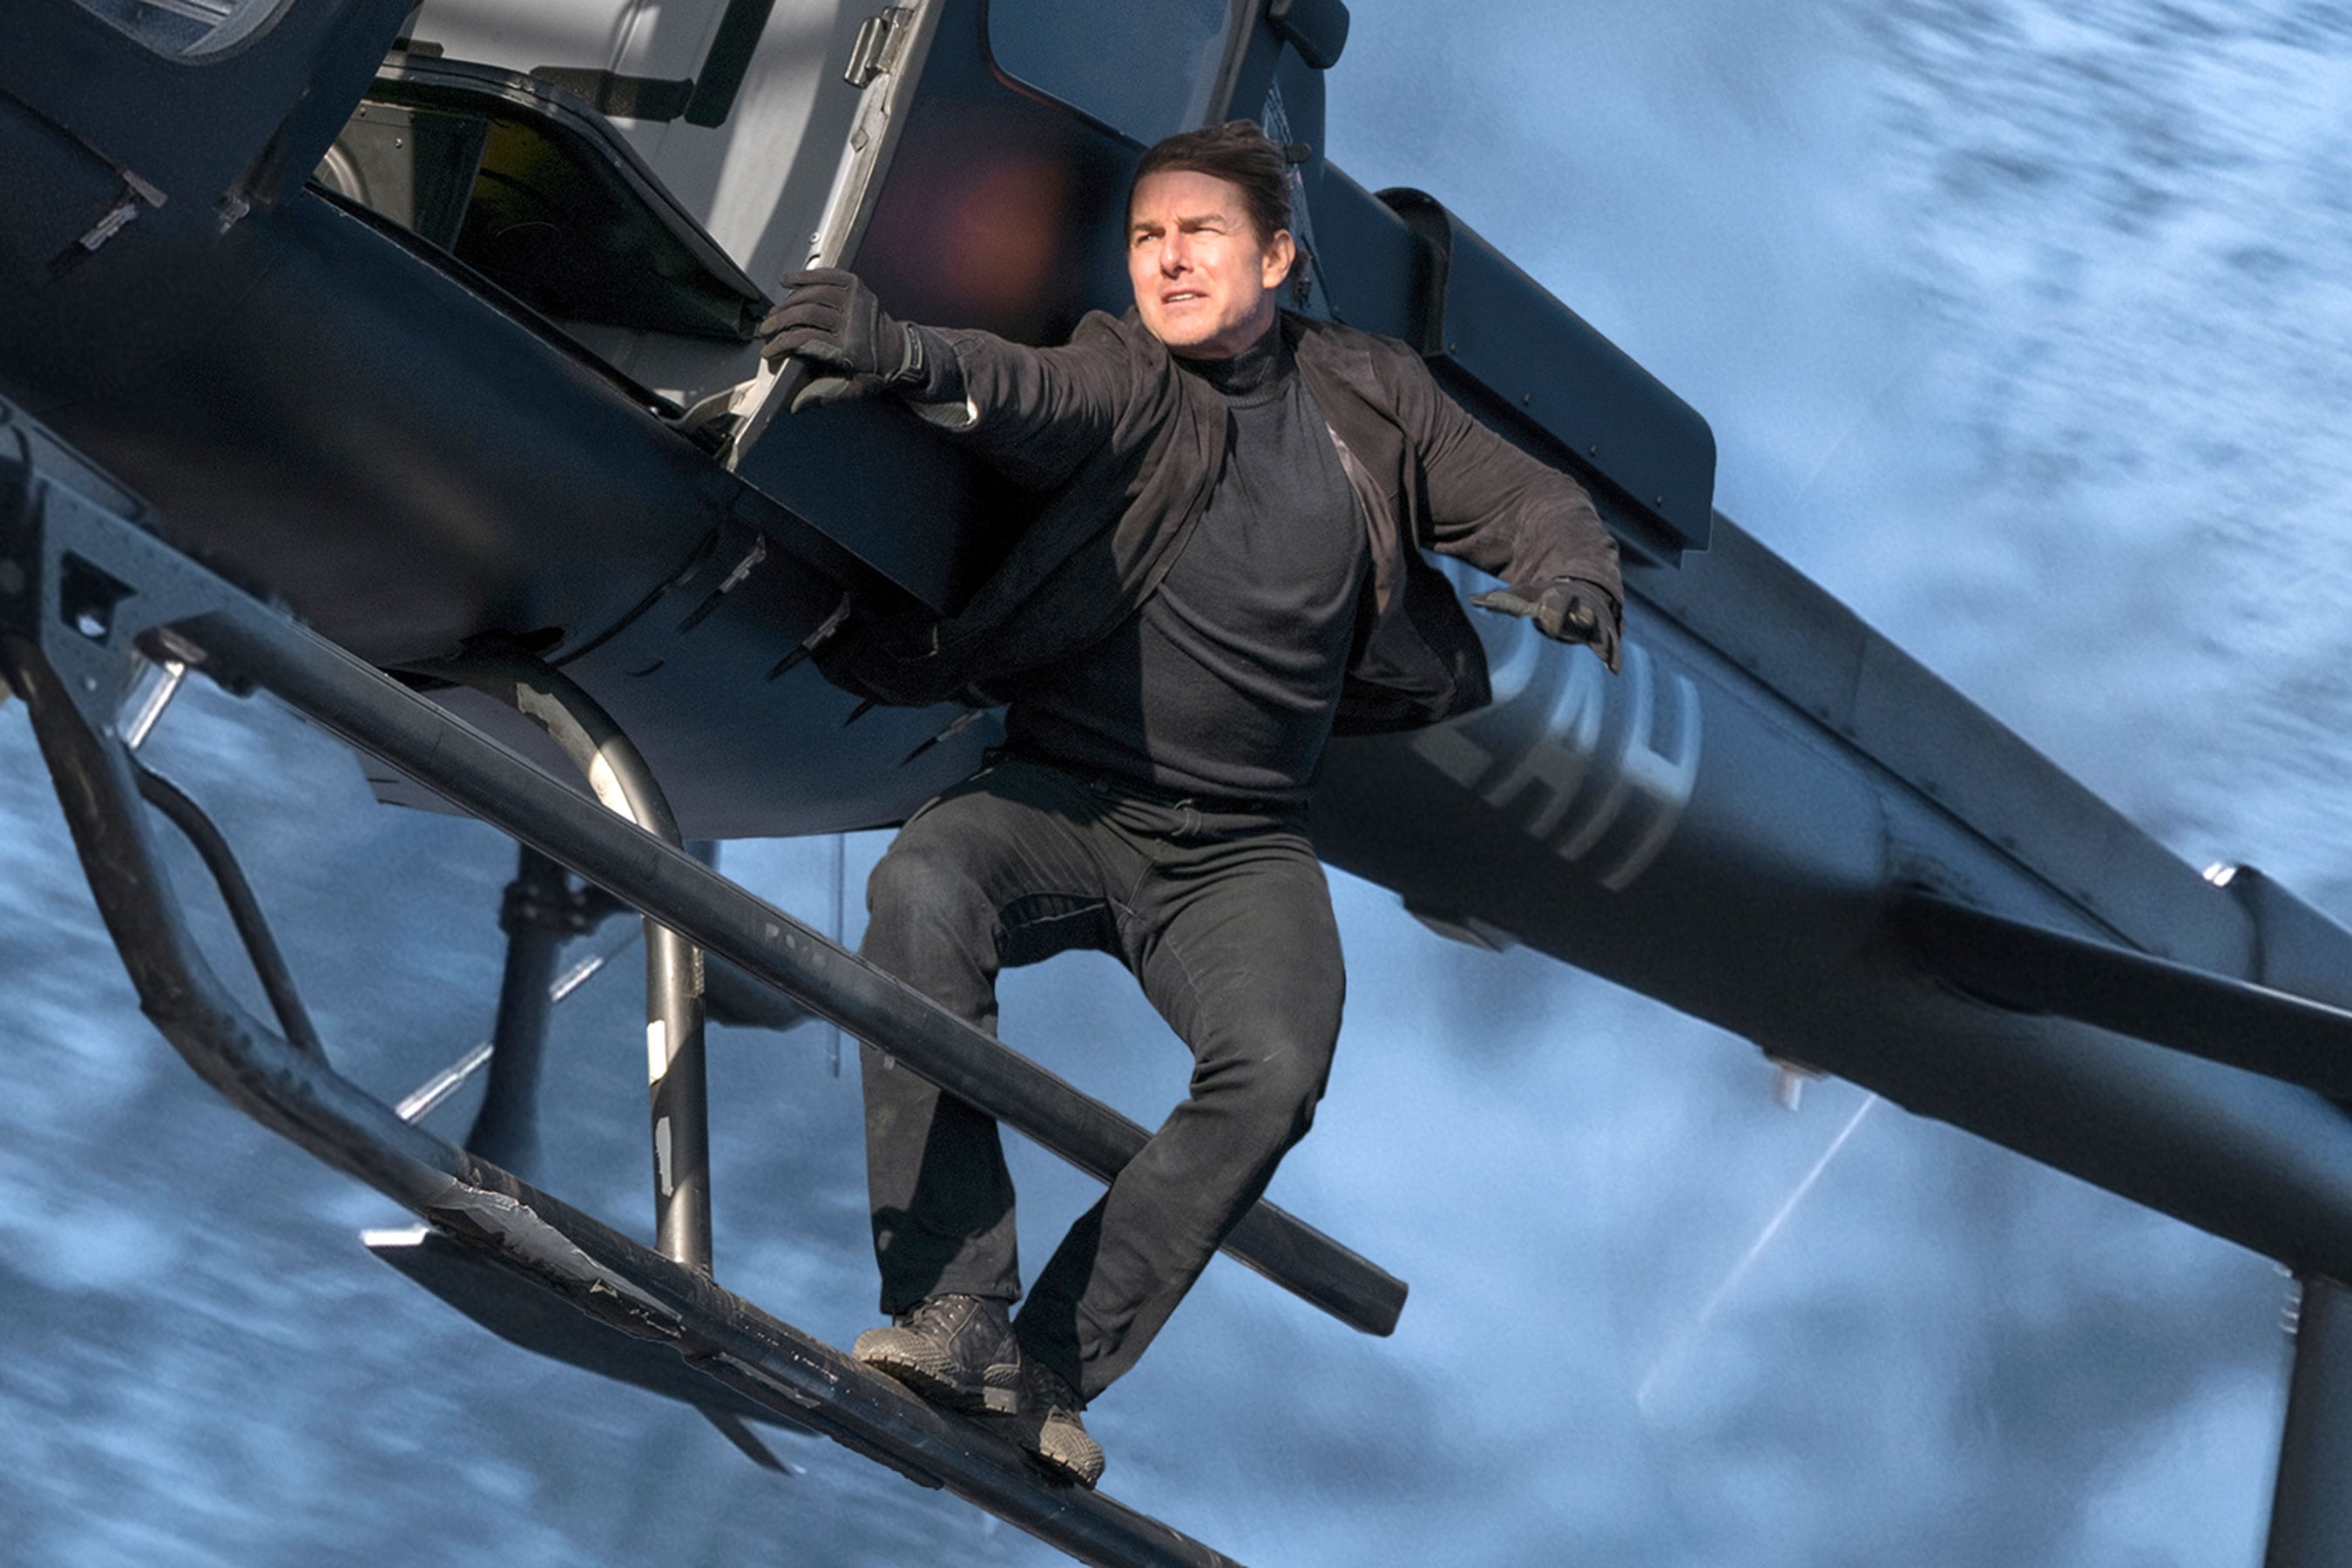 Is The Latest “Mission Impossible” Tom Cruise’s Best Yet? SCENES